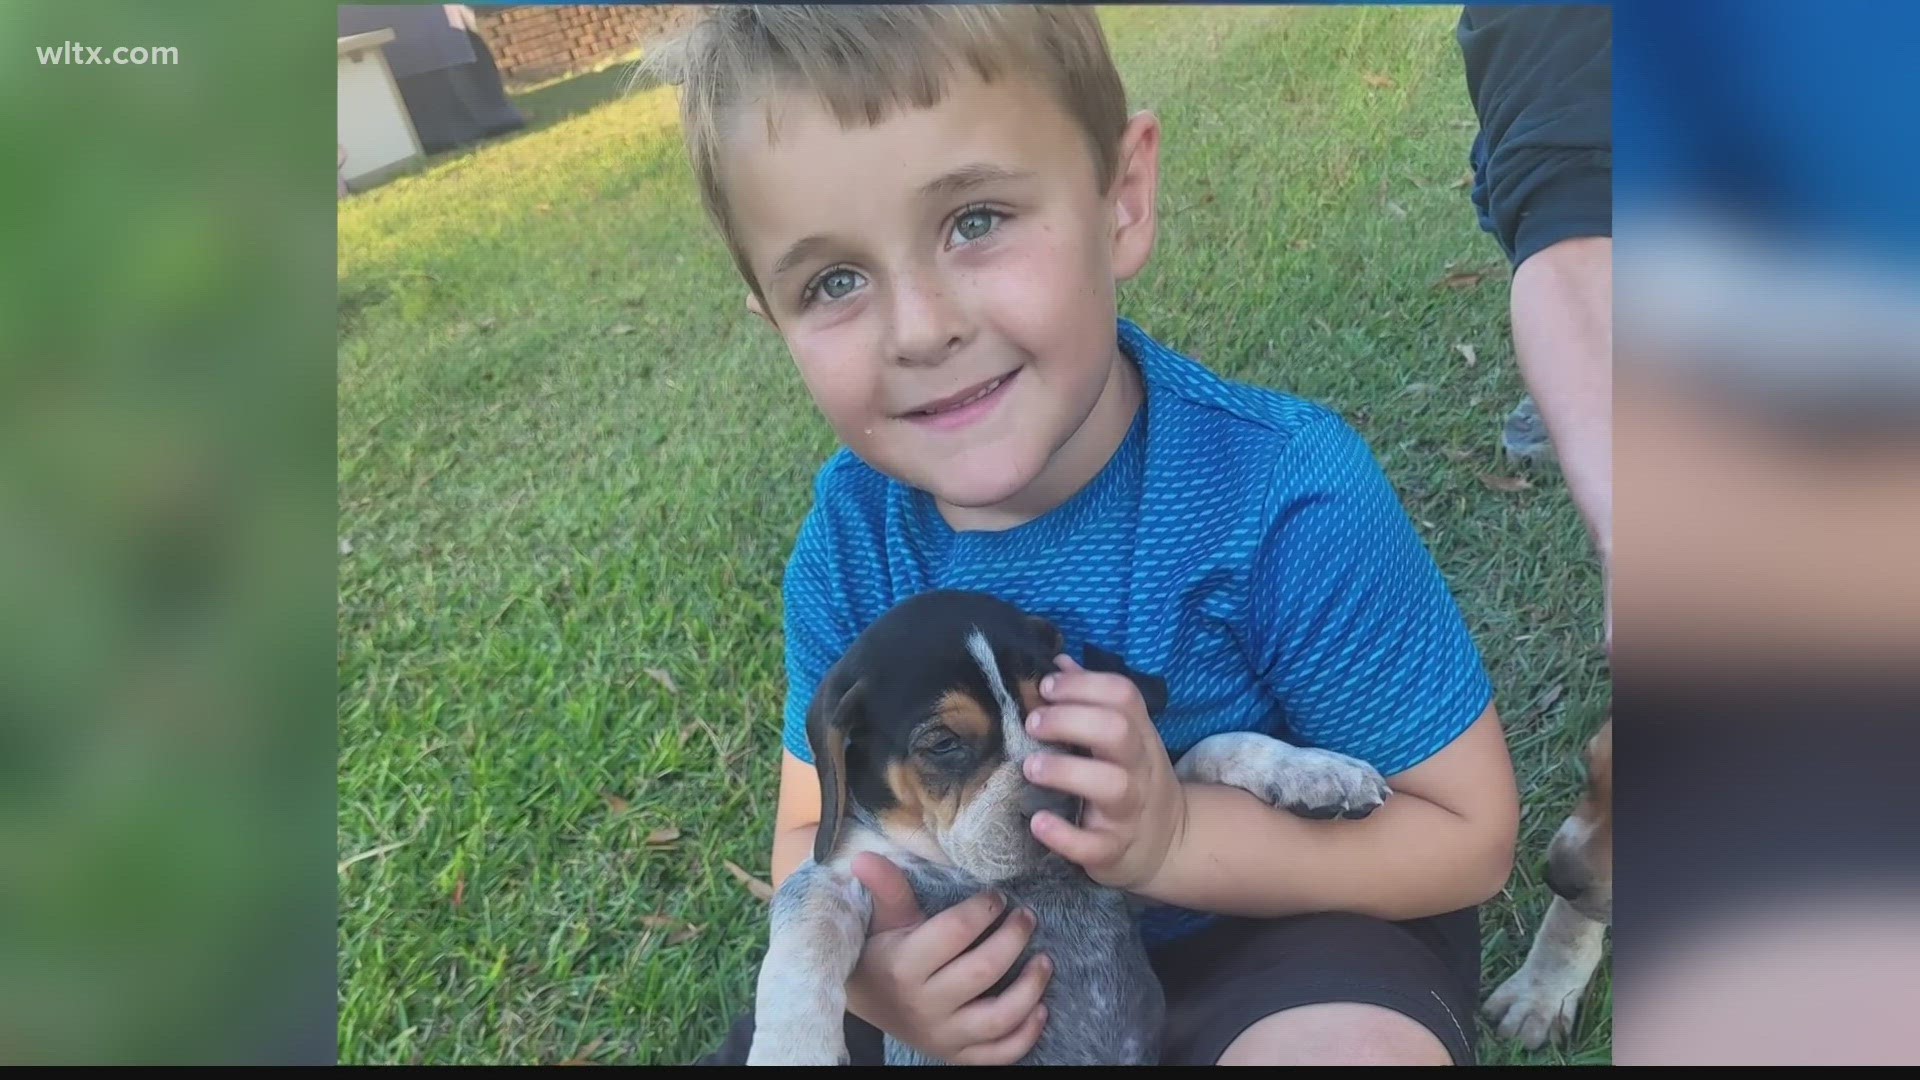 A family who just lost their 6-year-old son was helping raise funds for what he loved to do most at the Grand American Coon Hunt in Orangeburg.